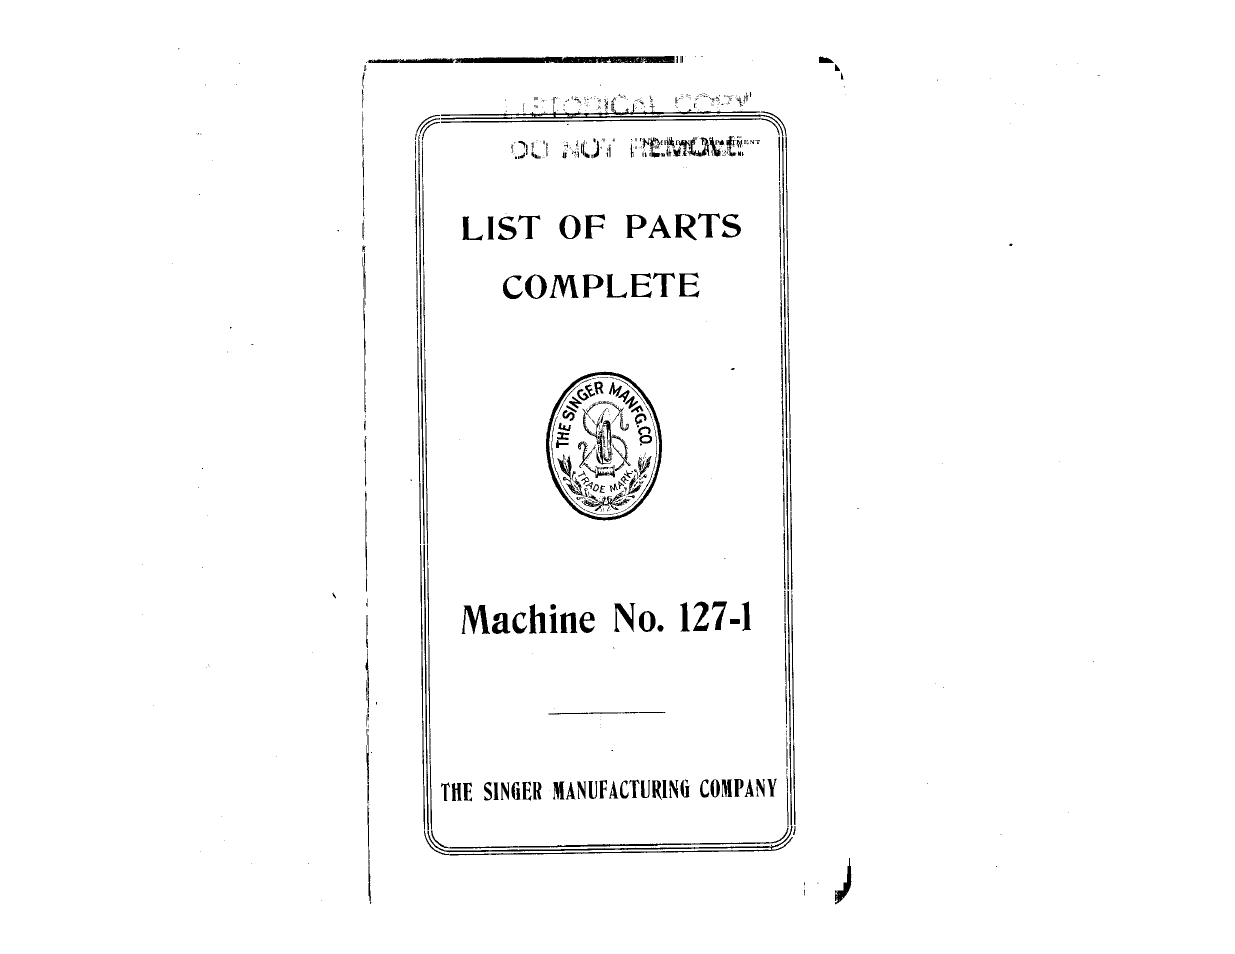 List of parts complete, Machine no. 127-1 | SINGER 127-1 User Manual | Page 2 / 5